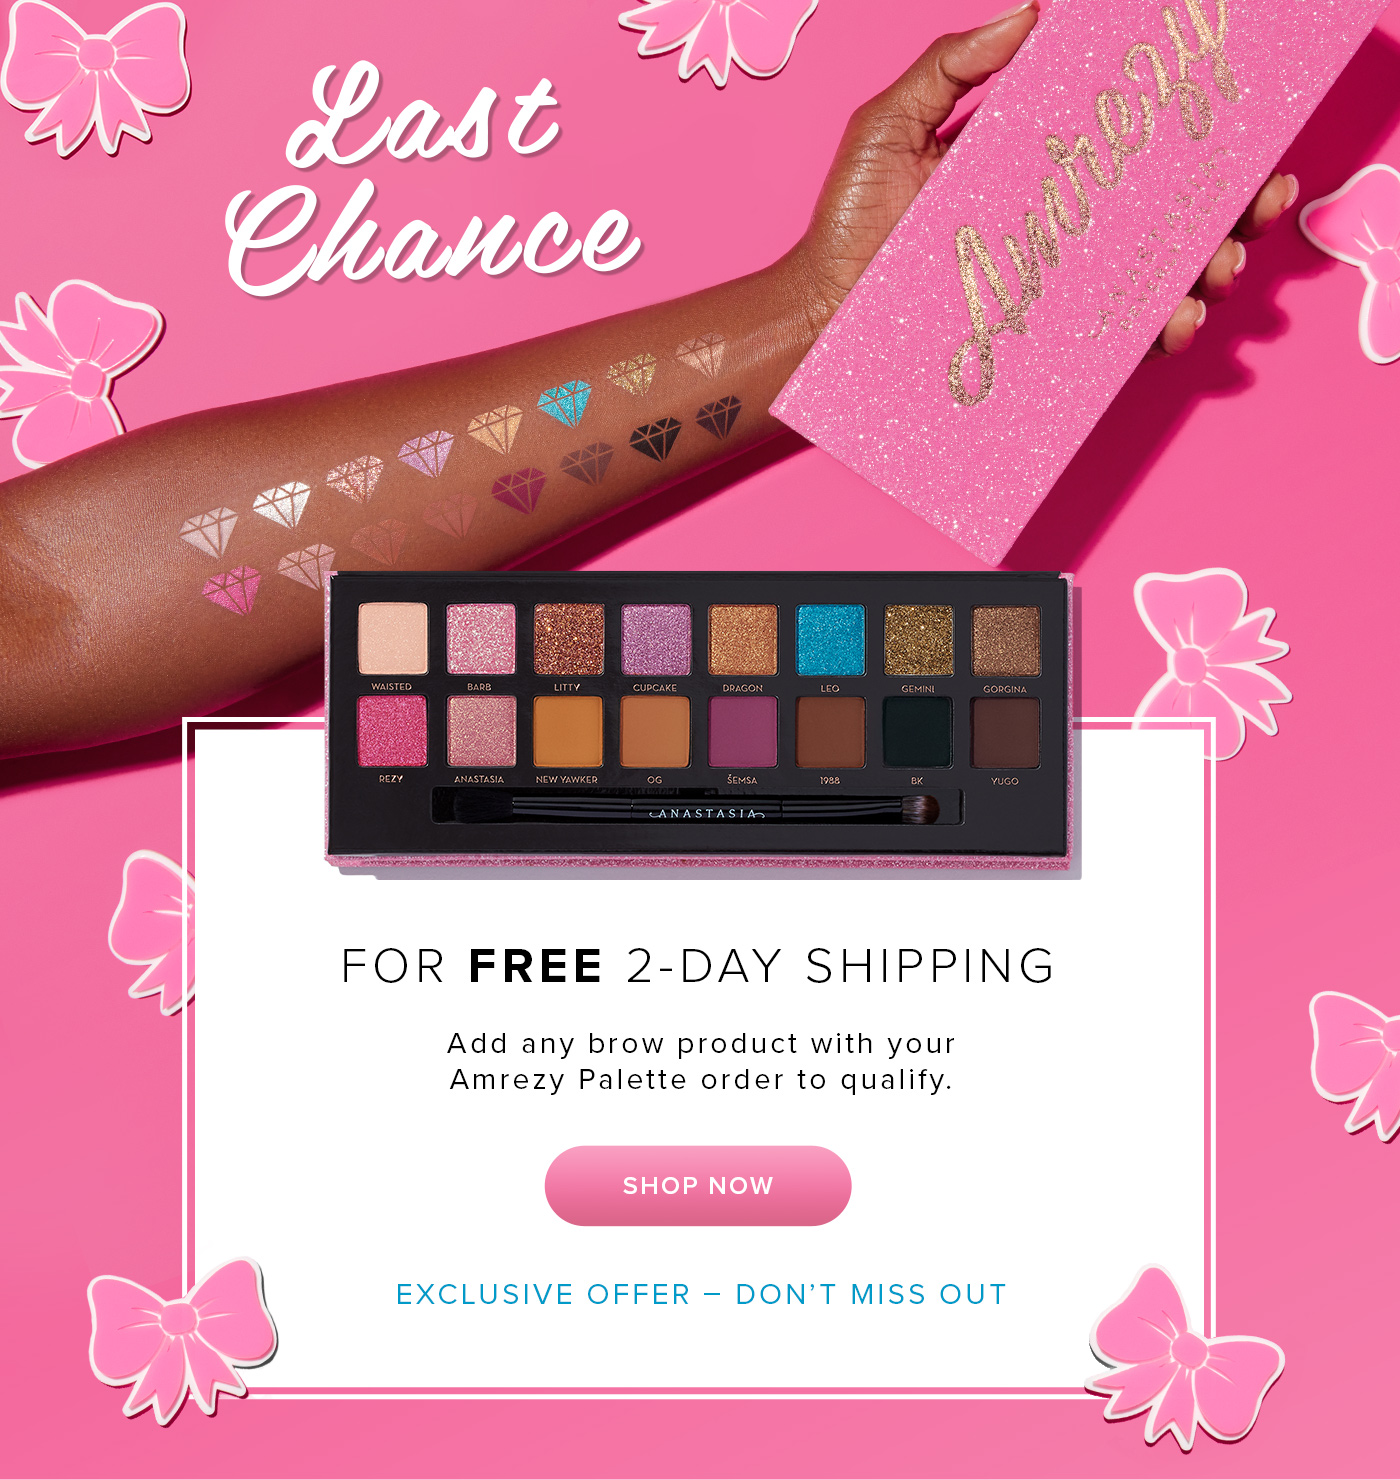 Last chance for free 2-day shipping